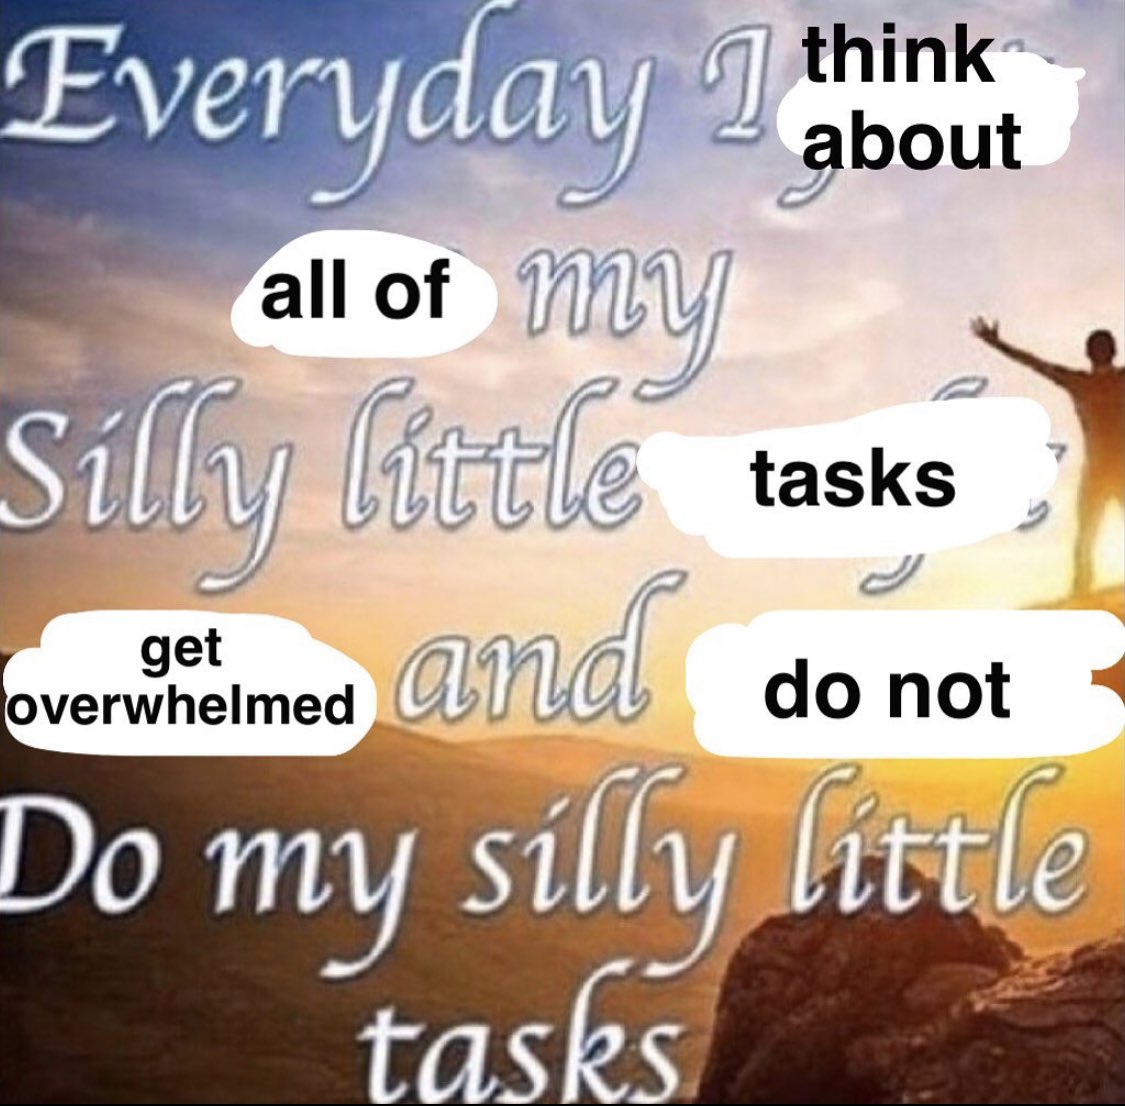 Everyday I think about all of my silly little tasks get overwhelmed and do not Do my silly little tasks